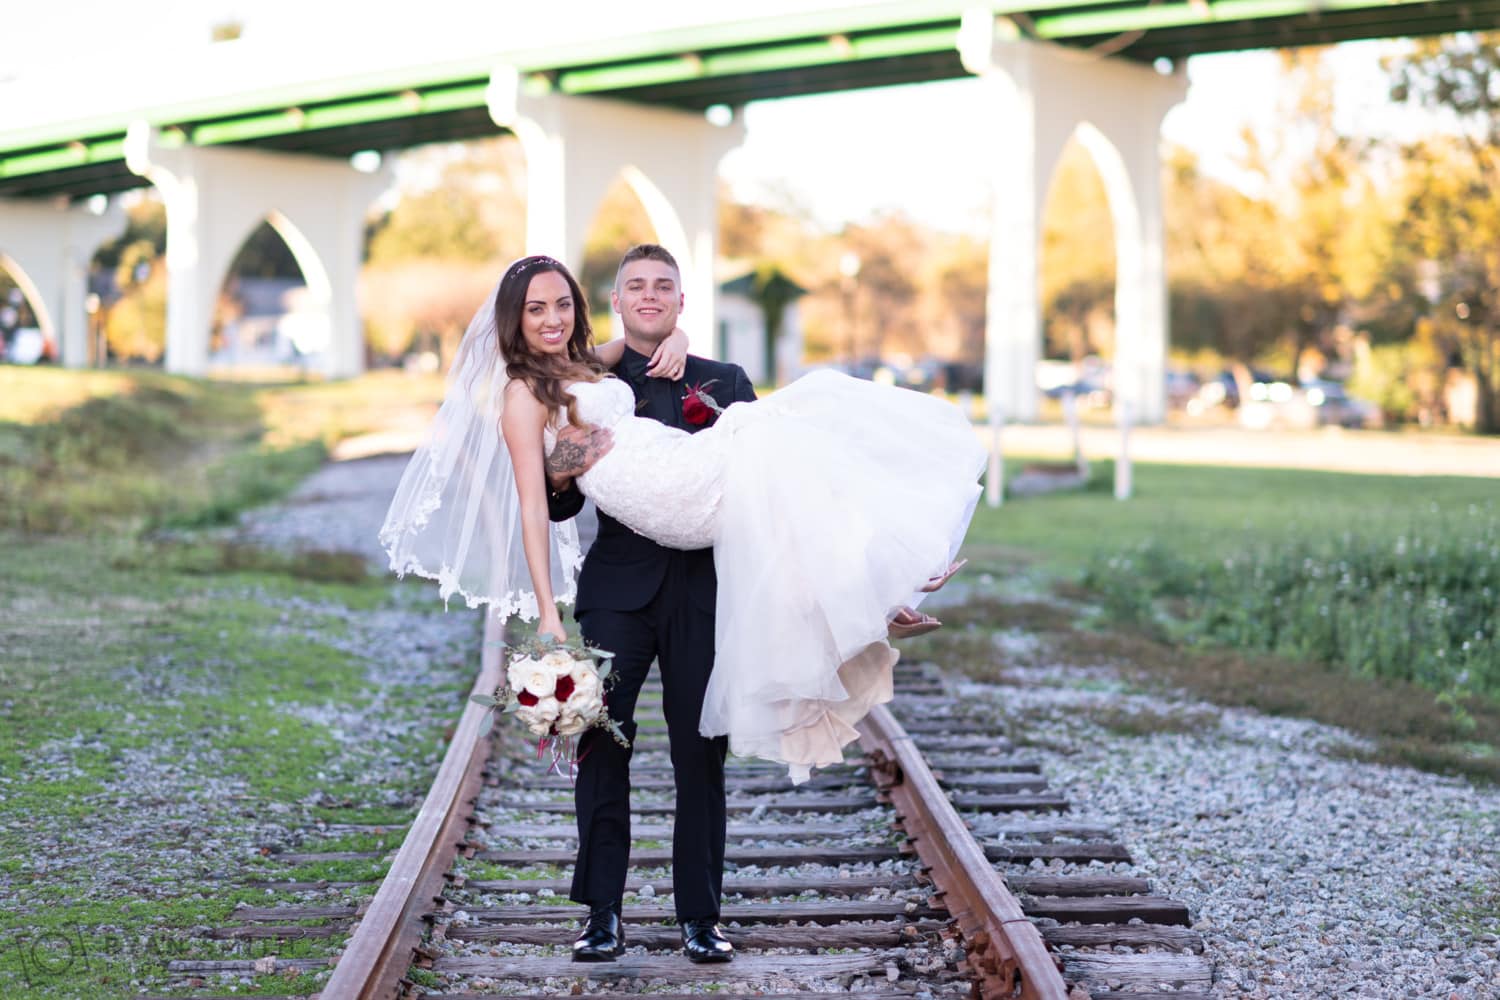 Groom carrying bride to the ceremony down the train tracks -